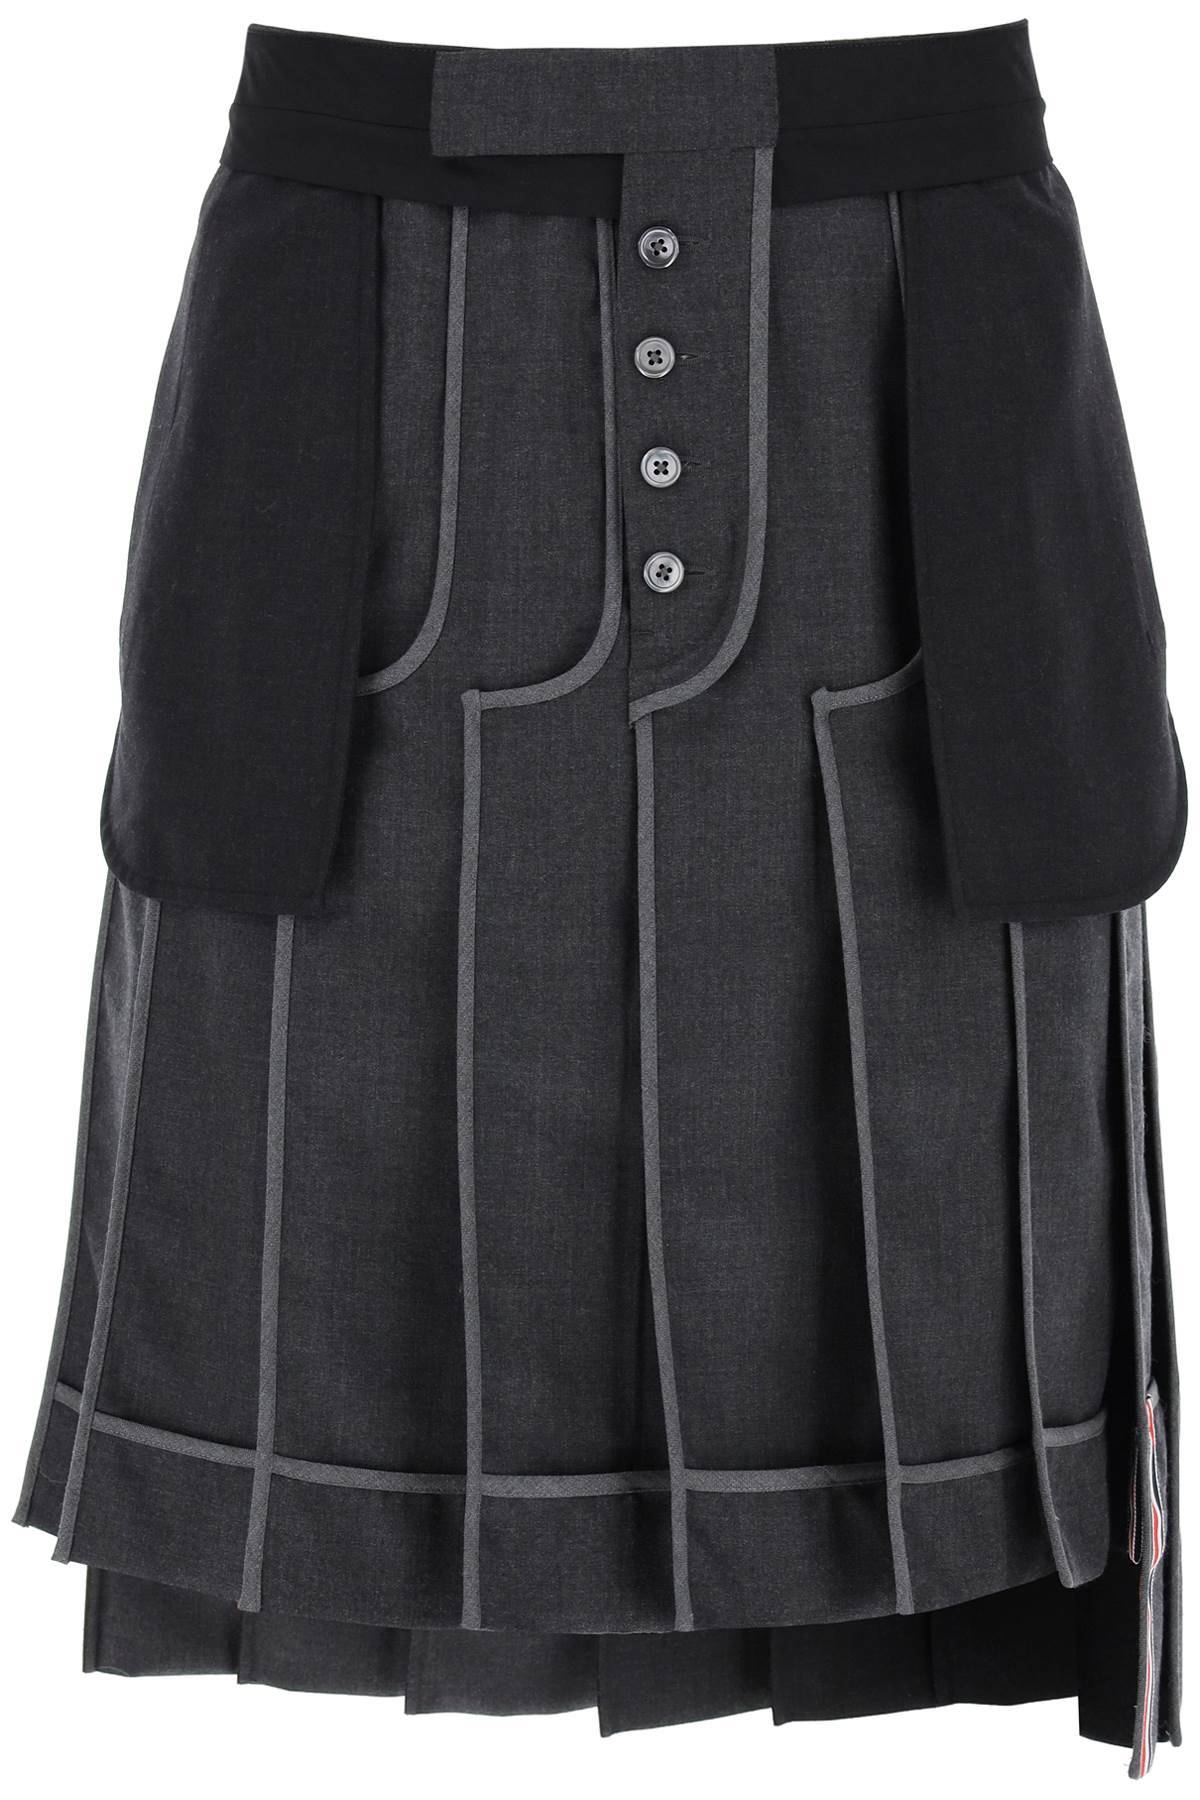 Thom Browne THOM BROWNE inside-out pleated skirt